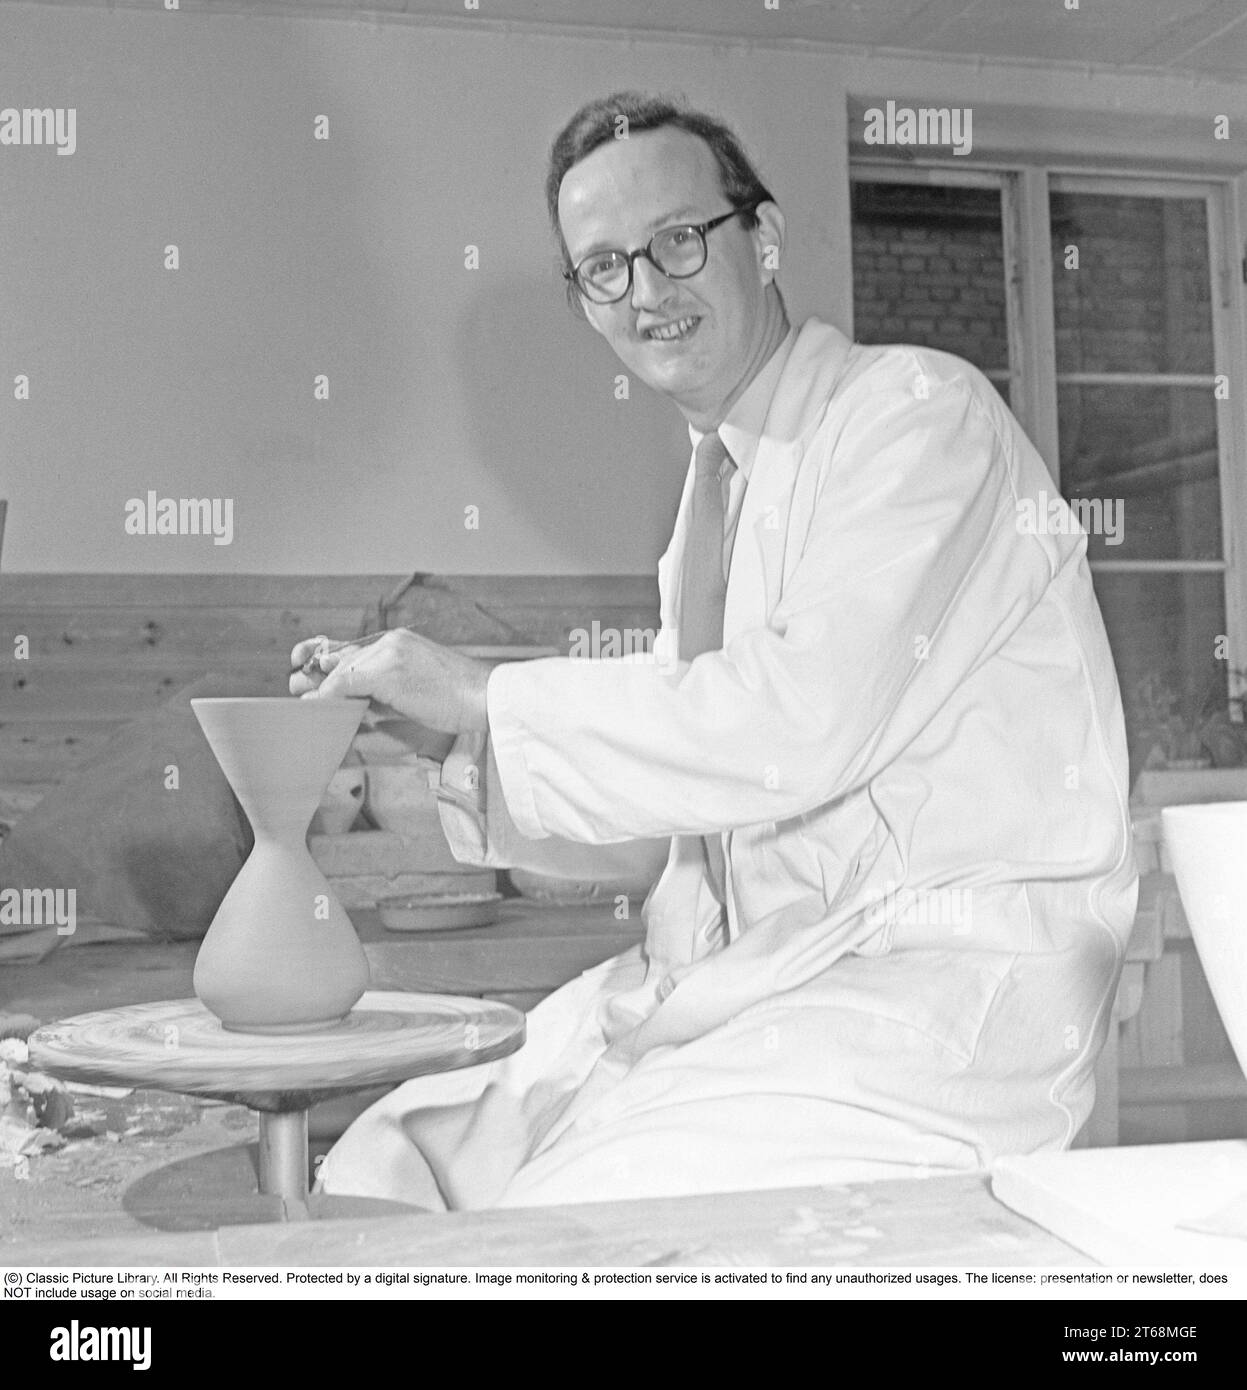 Stig Lindberg (17 August 1916 in Umeå, Sweden – 7 April 1982 in San Felice Circeo, Italy) was a Swedish ceramic designer, glass designer, textile designer, industrial designer, painter, and illustrator.   One of Sweden's most important postwar designers, Lindberg created whimsical studio ceramics and graceful tableware lines during a long career with the Gustavsberg pottery factory. Stig Lindberg studied painting at the University College of Arts, Crafts and Design. In 1937, he went to work at Gustavsberg under Wilhelm Kåge. In 1949, he was named Kåge's successor as art director. From this per Stock Photo